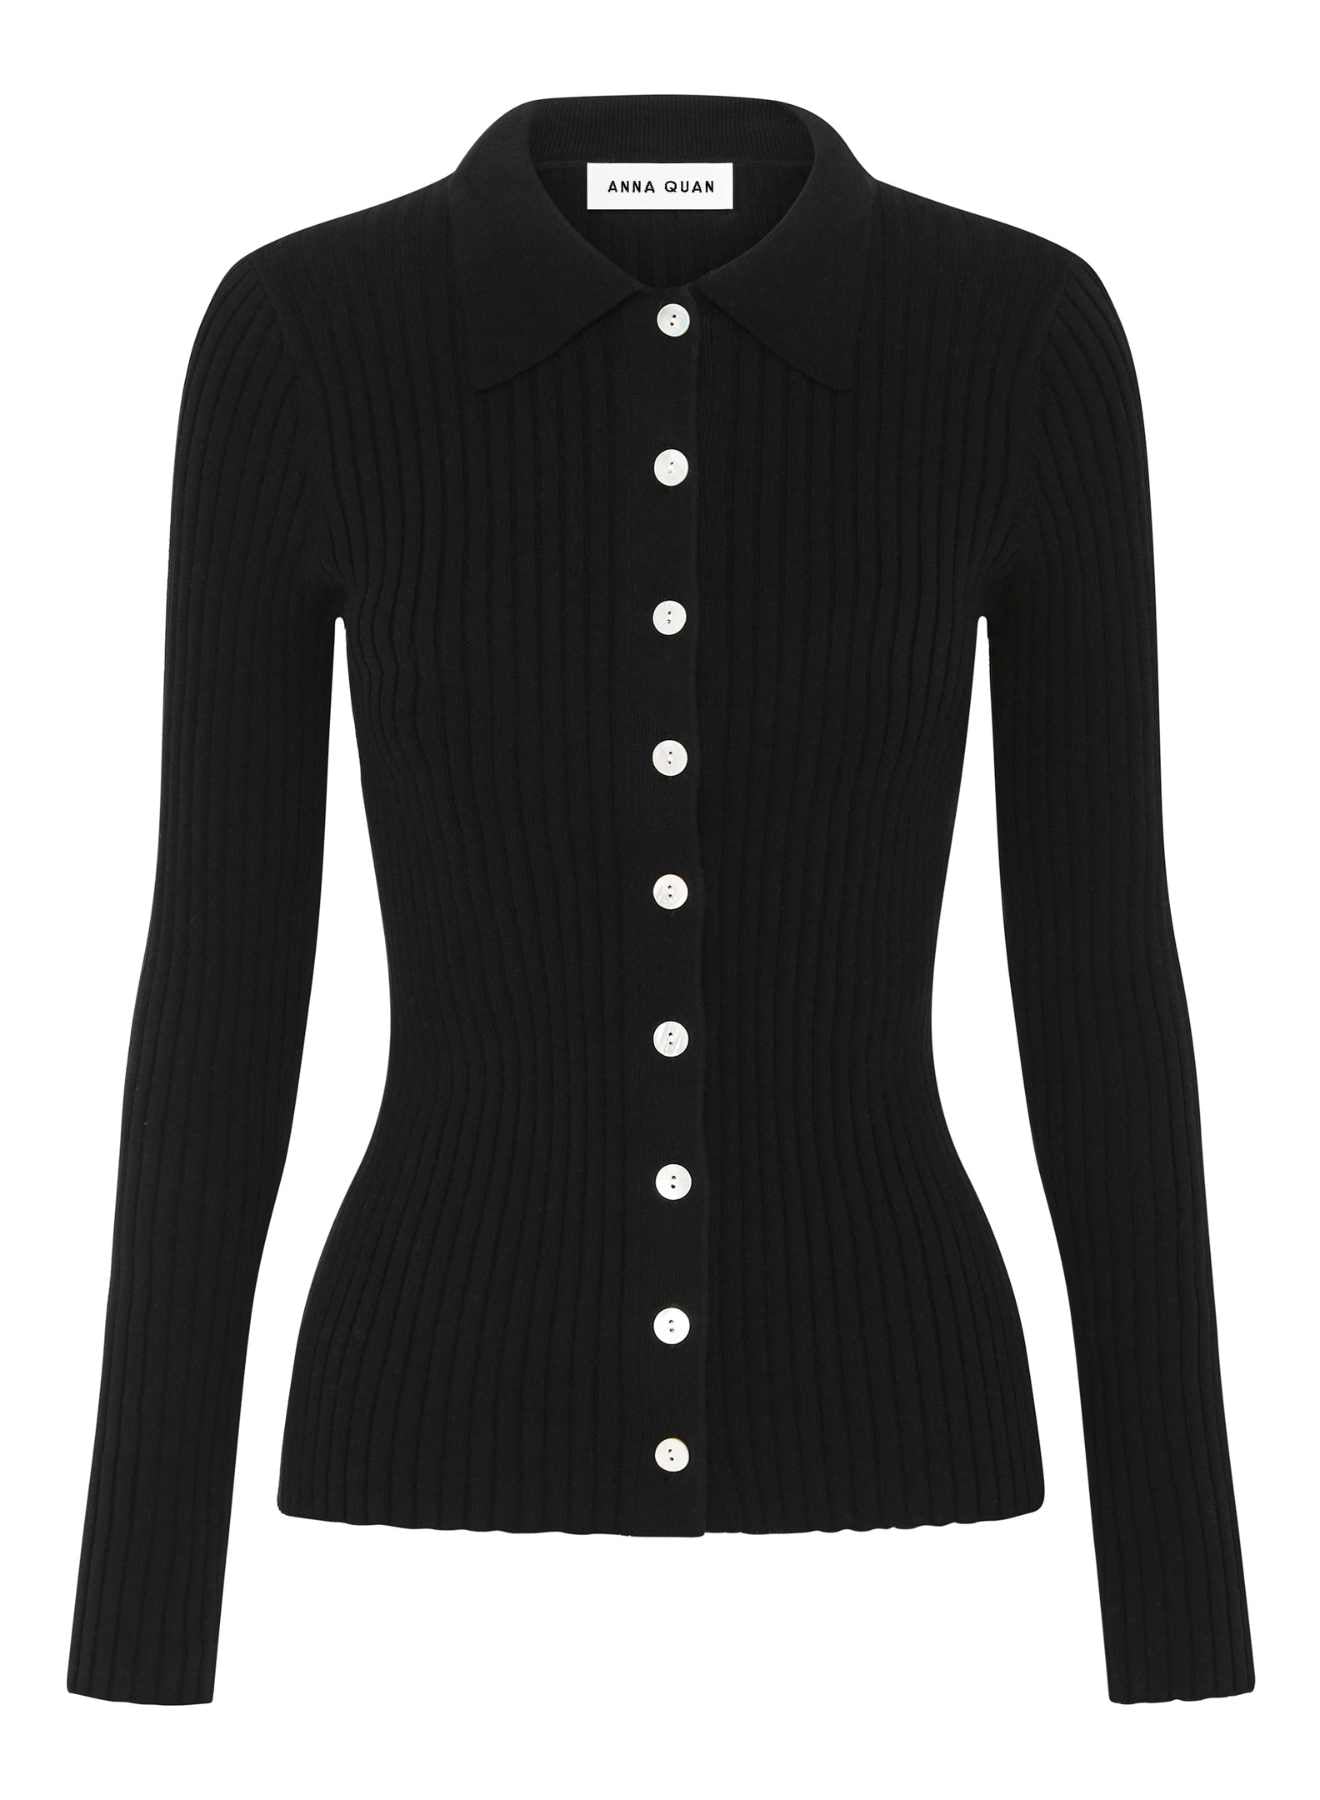 Cotton rib long sleeve polo knit top with contrast trims and mother of pearl buttons. Black knit top, black long sleeve knit top, black work top.